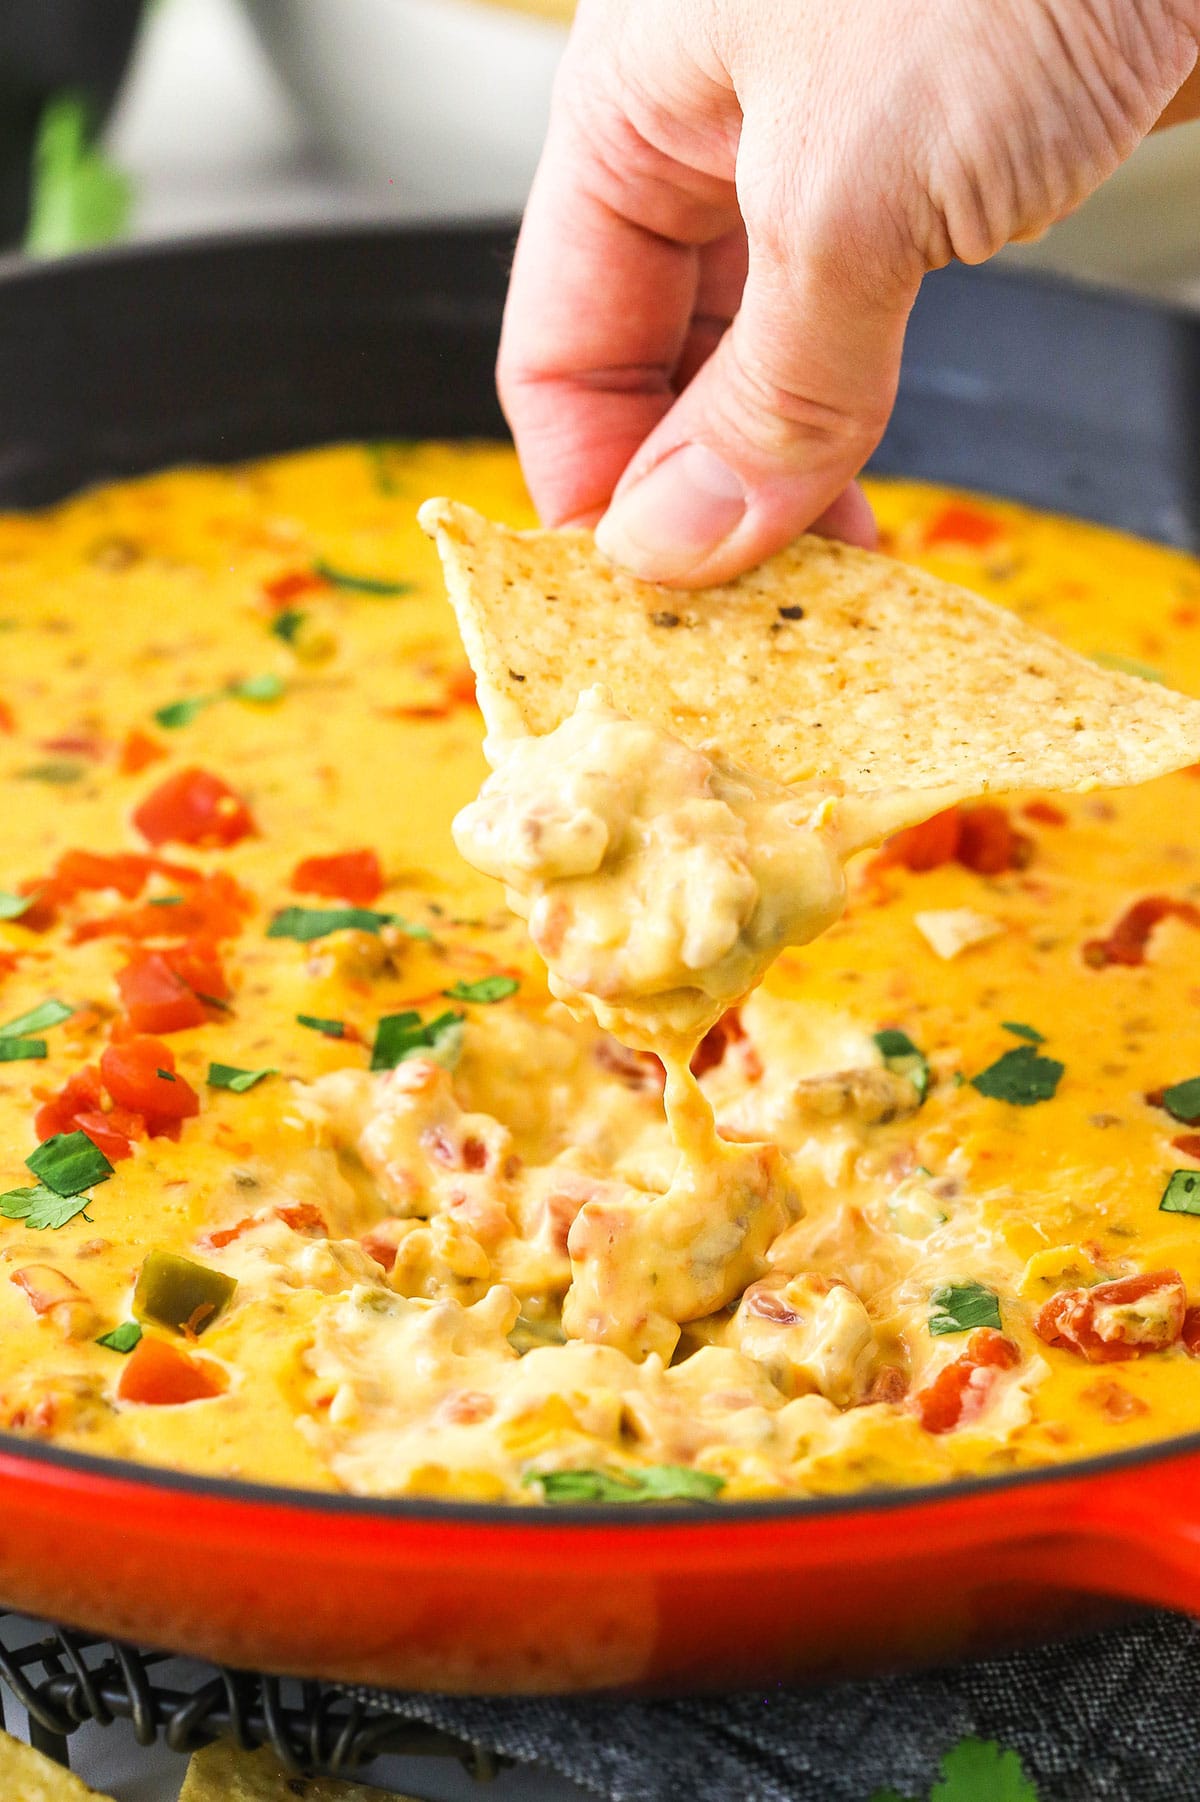 Cheese dip being lifted out of a skillet on a tortilla chip.